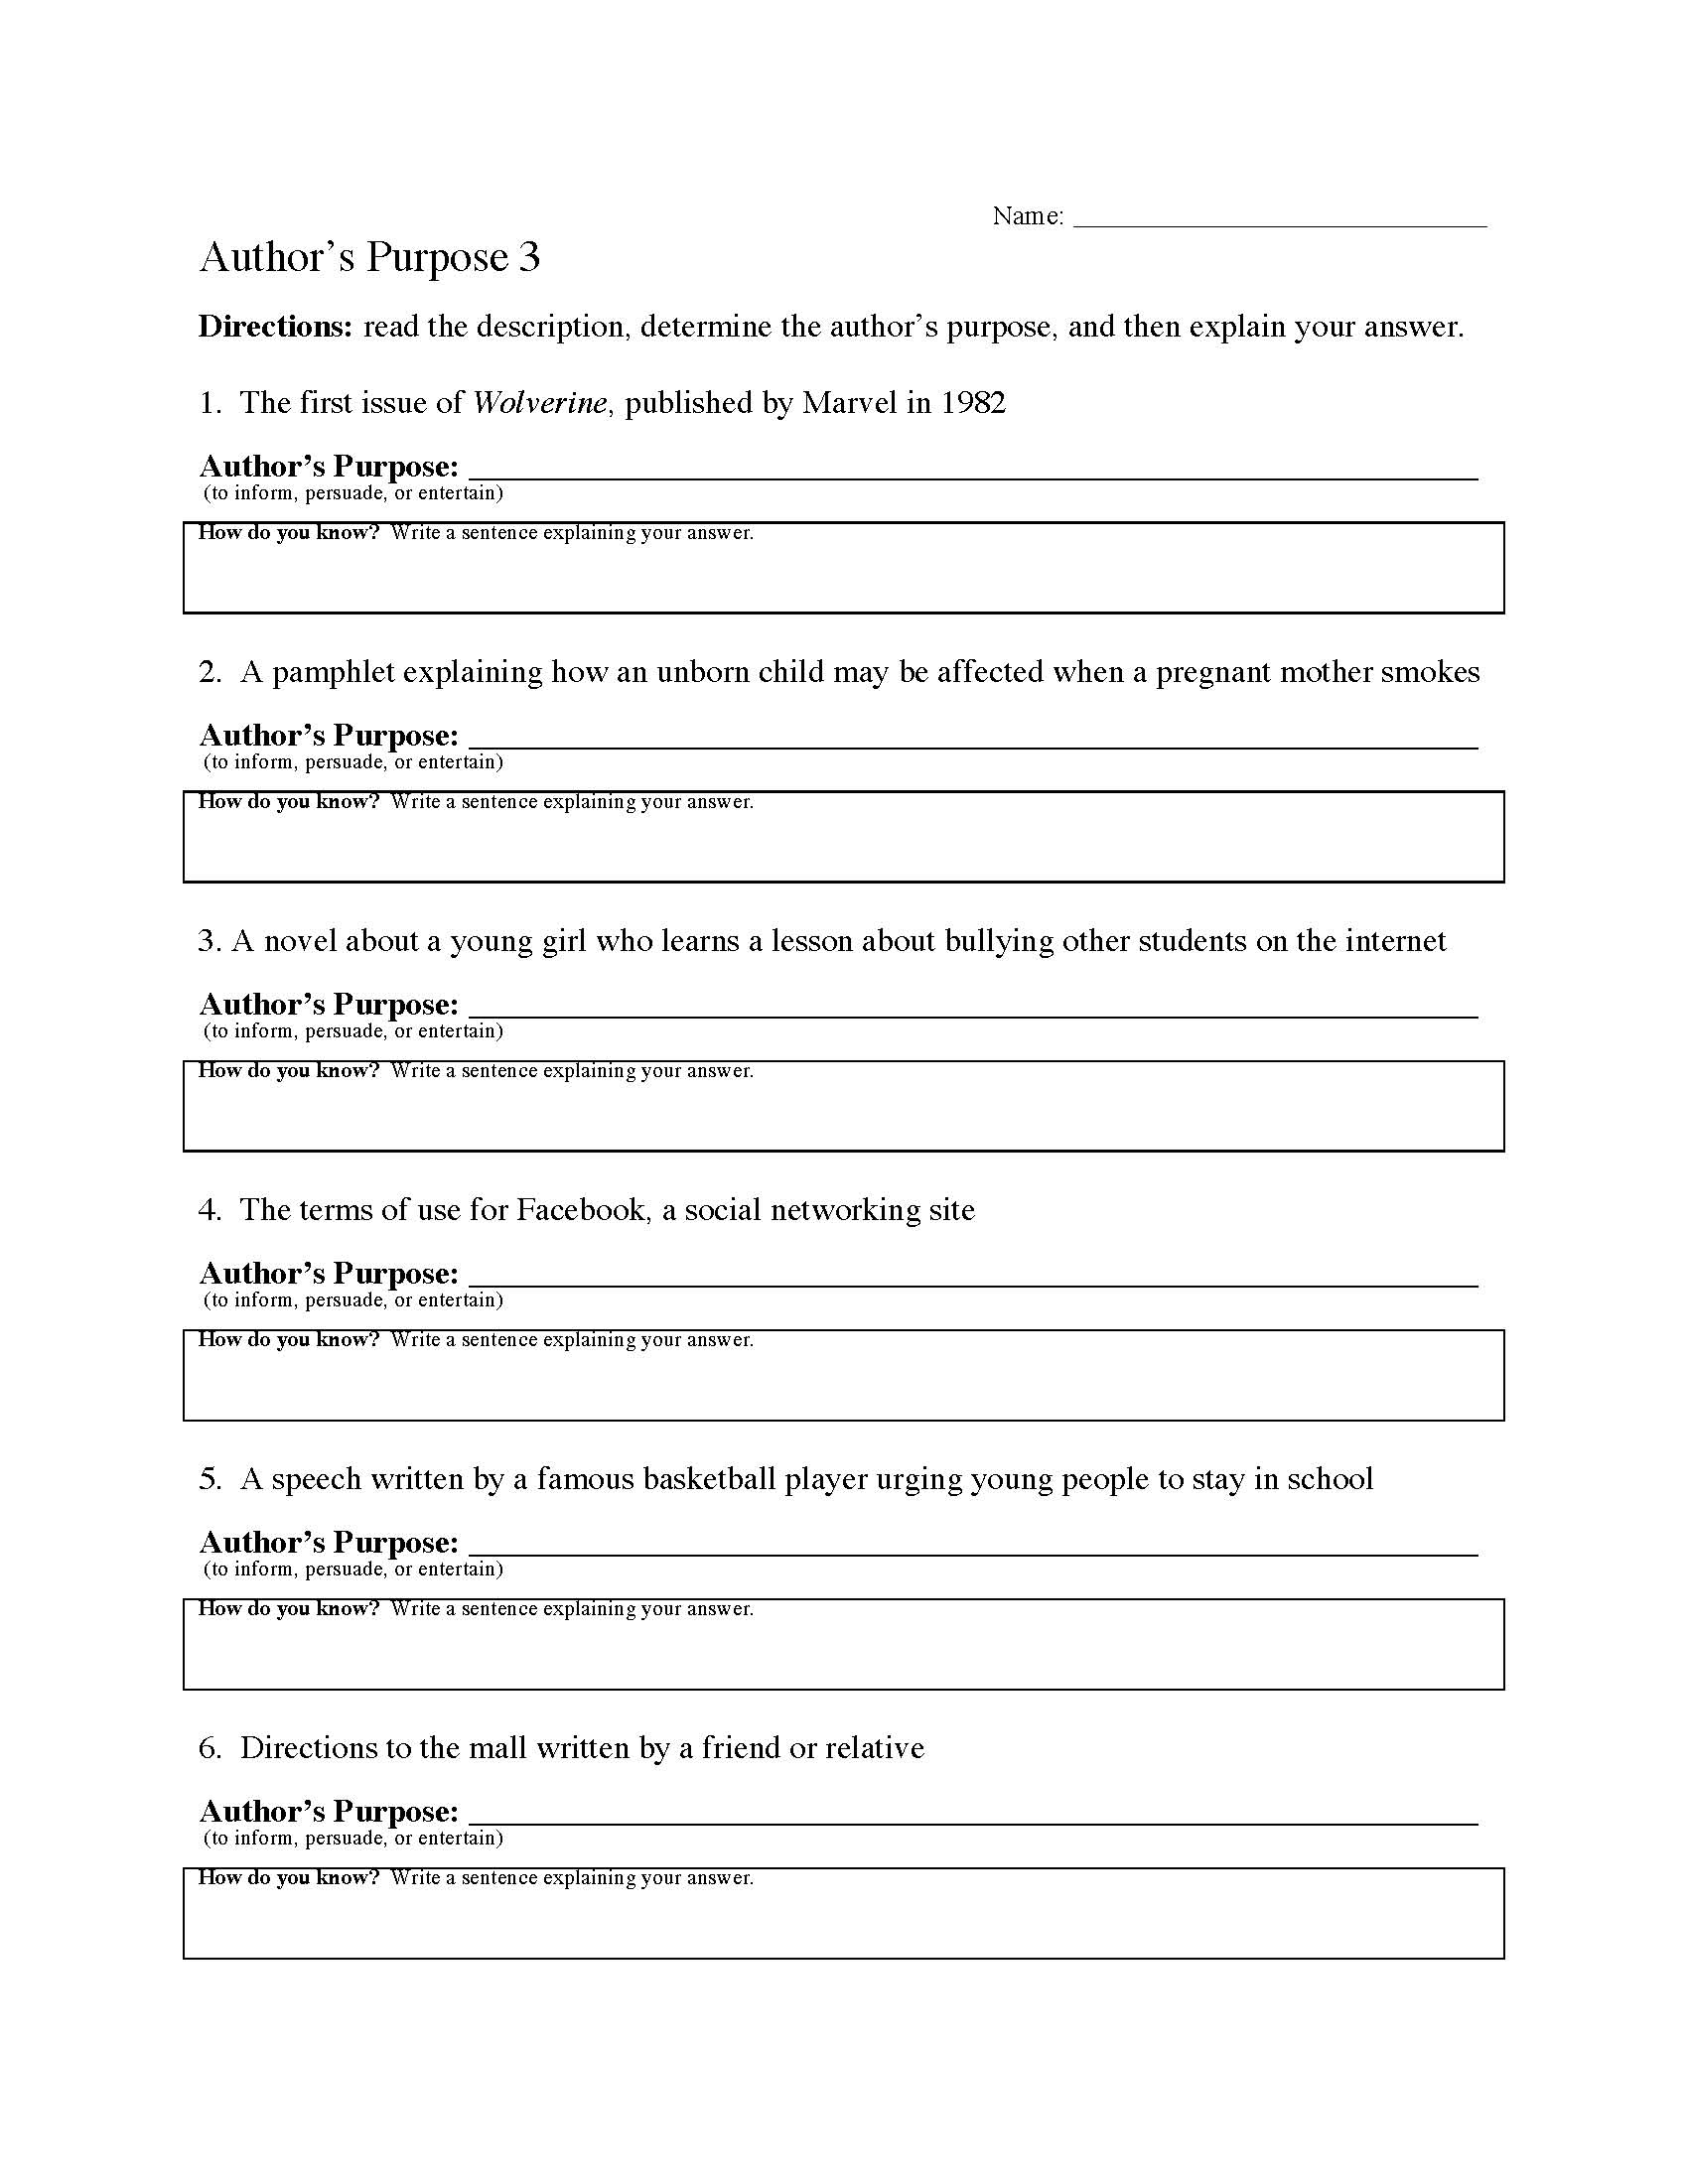 author-s-purpose-worksheet-3-preview